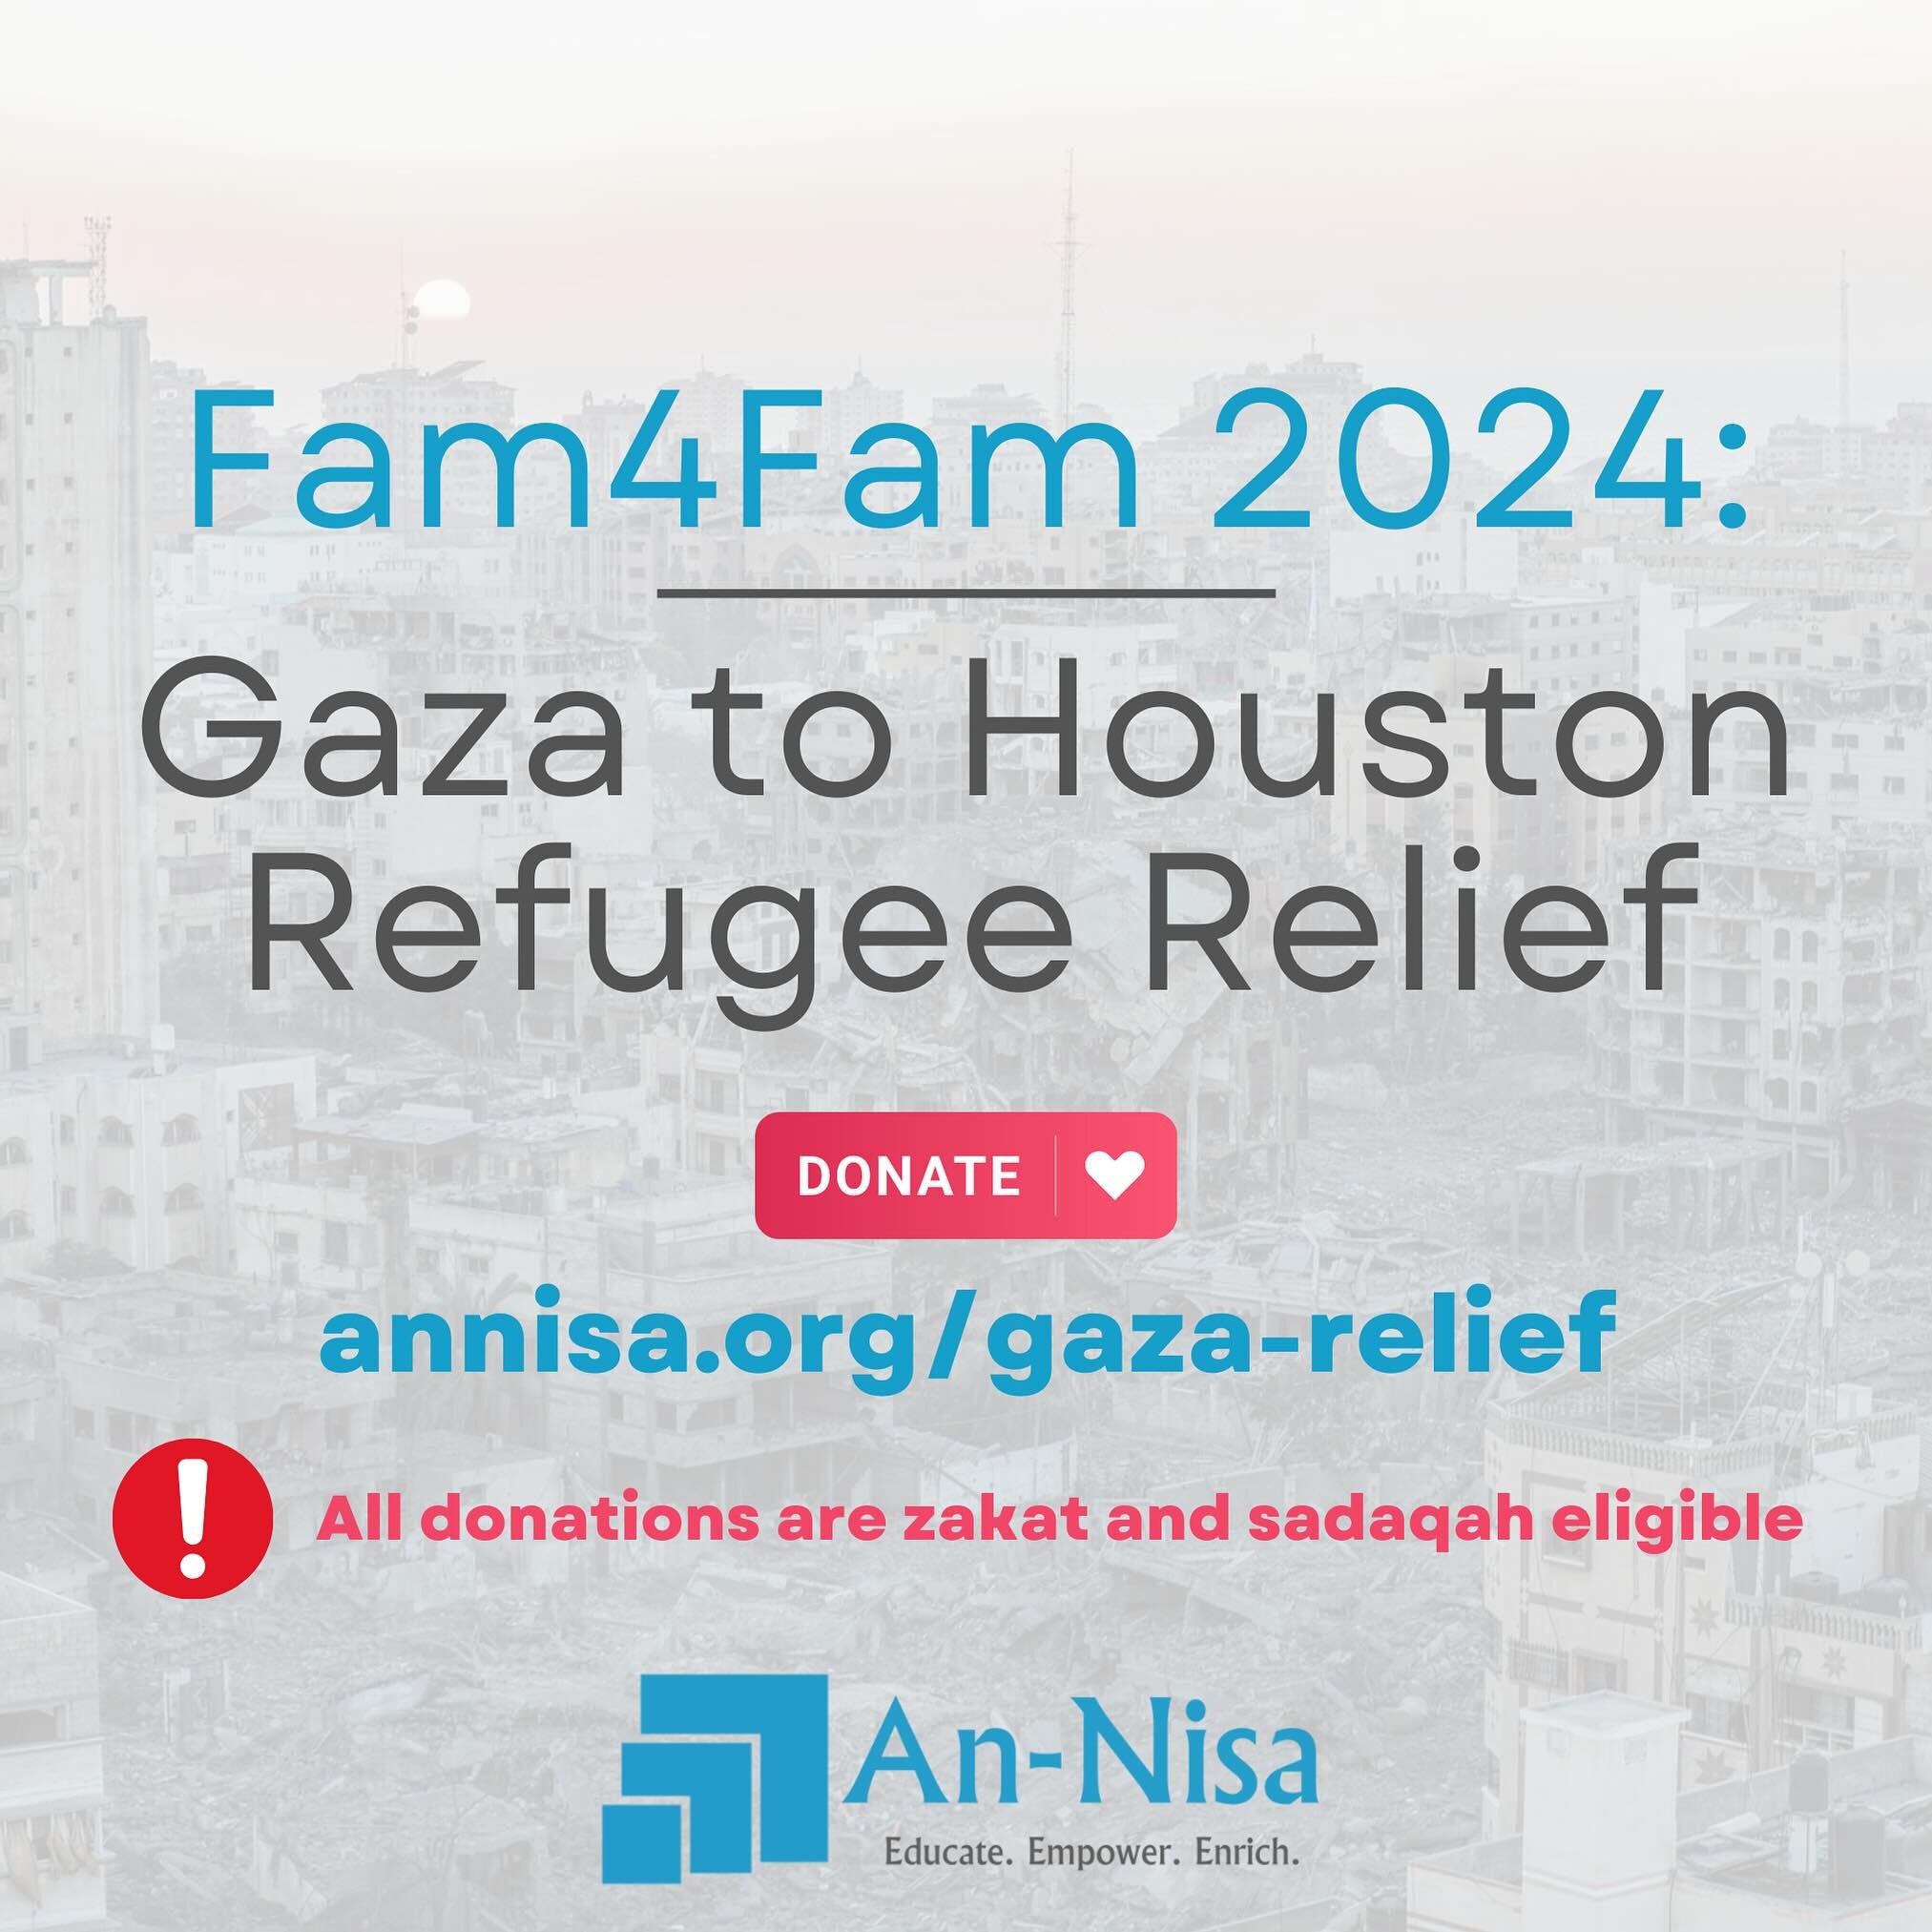 ❗️All donations are zakat and sadaqah eligible! Donate at annisa.org/gaza-relief 

We have received a heartwarming amount of support for our Fam4Fam 2024: Gaza to Houston Refugee Relief and we are so thankful for our community for coming together for